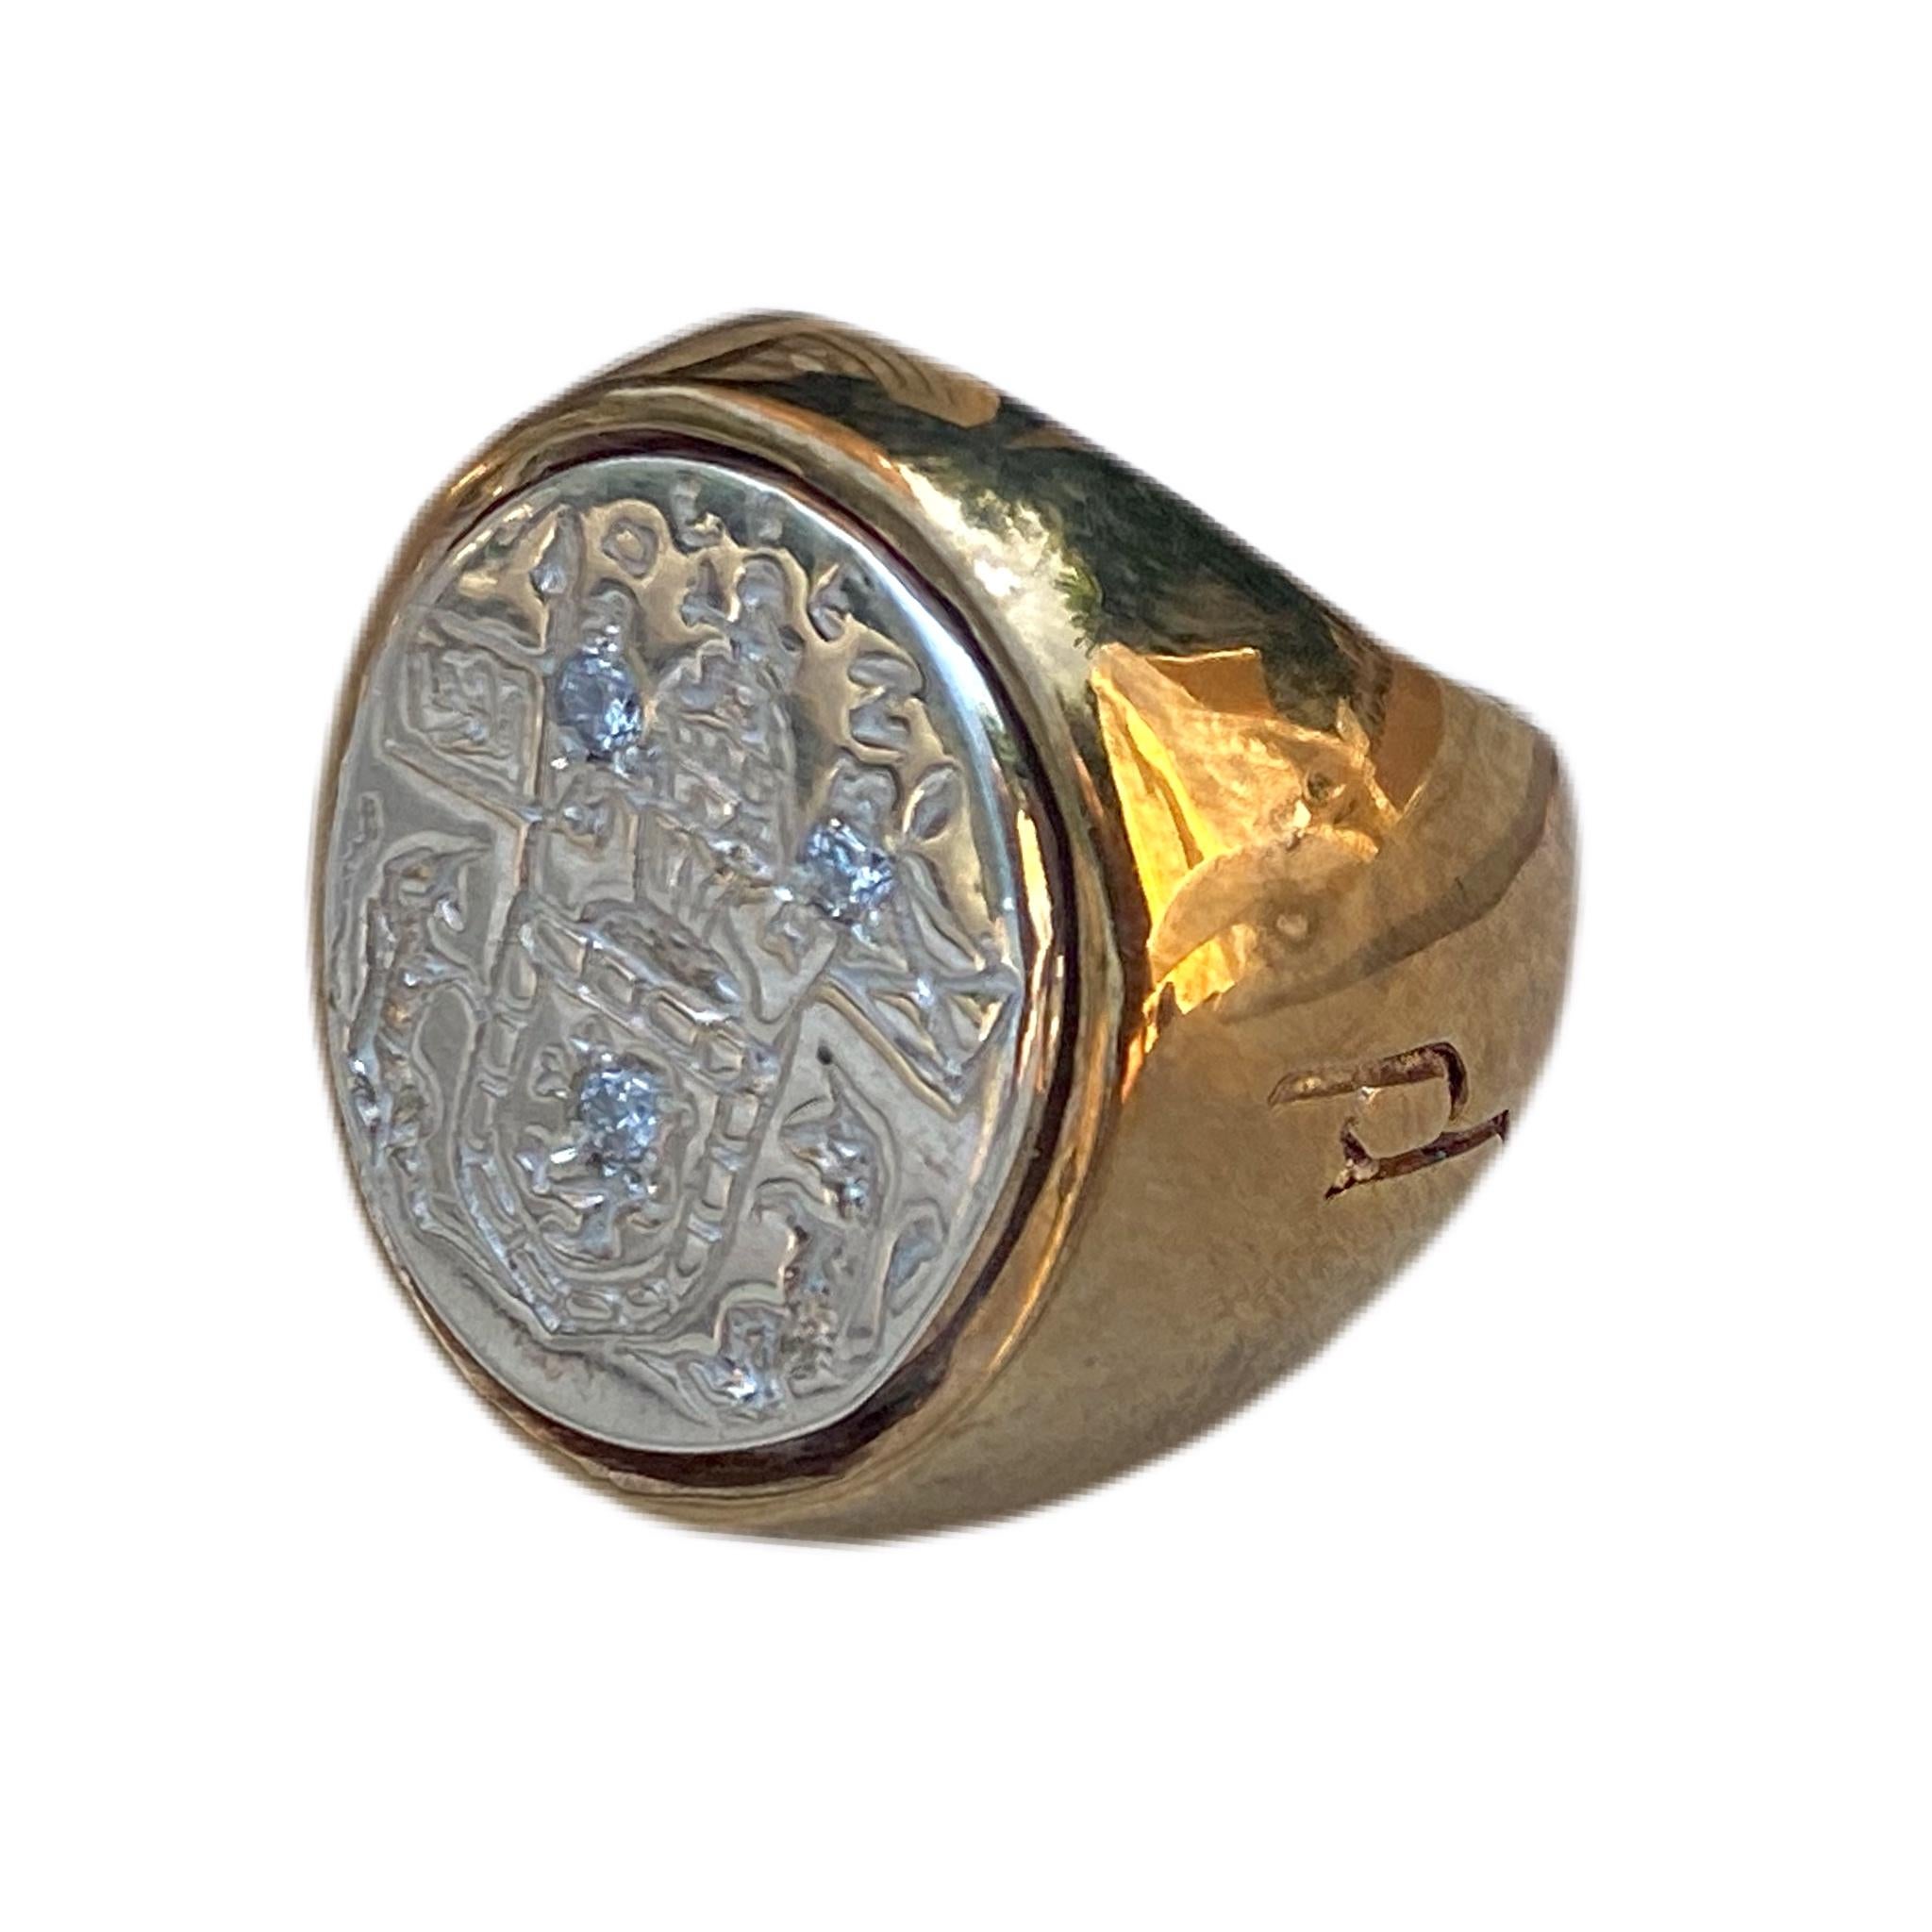 3 pcs White Diamond Crest Signet Ring Sterling Silver Bronze J Dauphin can be worn by women or men.

Inspired by Queen Mary of Scots ring. Gold signet-ring; engraved; shoulders ornamented with flowers and leaves. Oval bezel set with silver intaglio